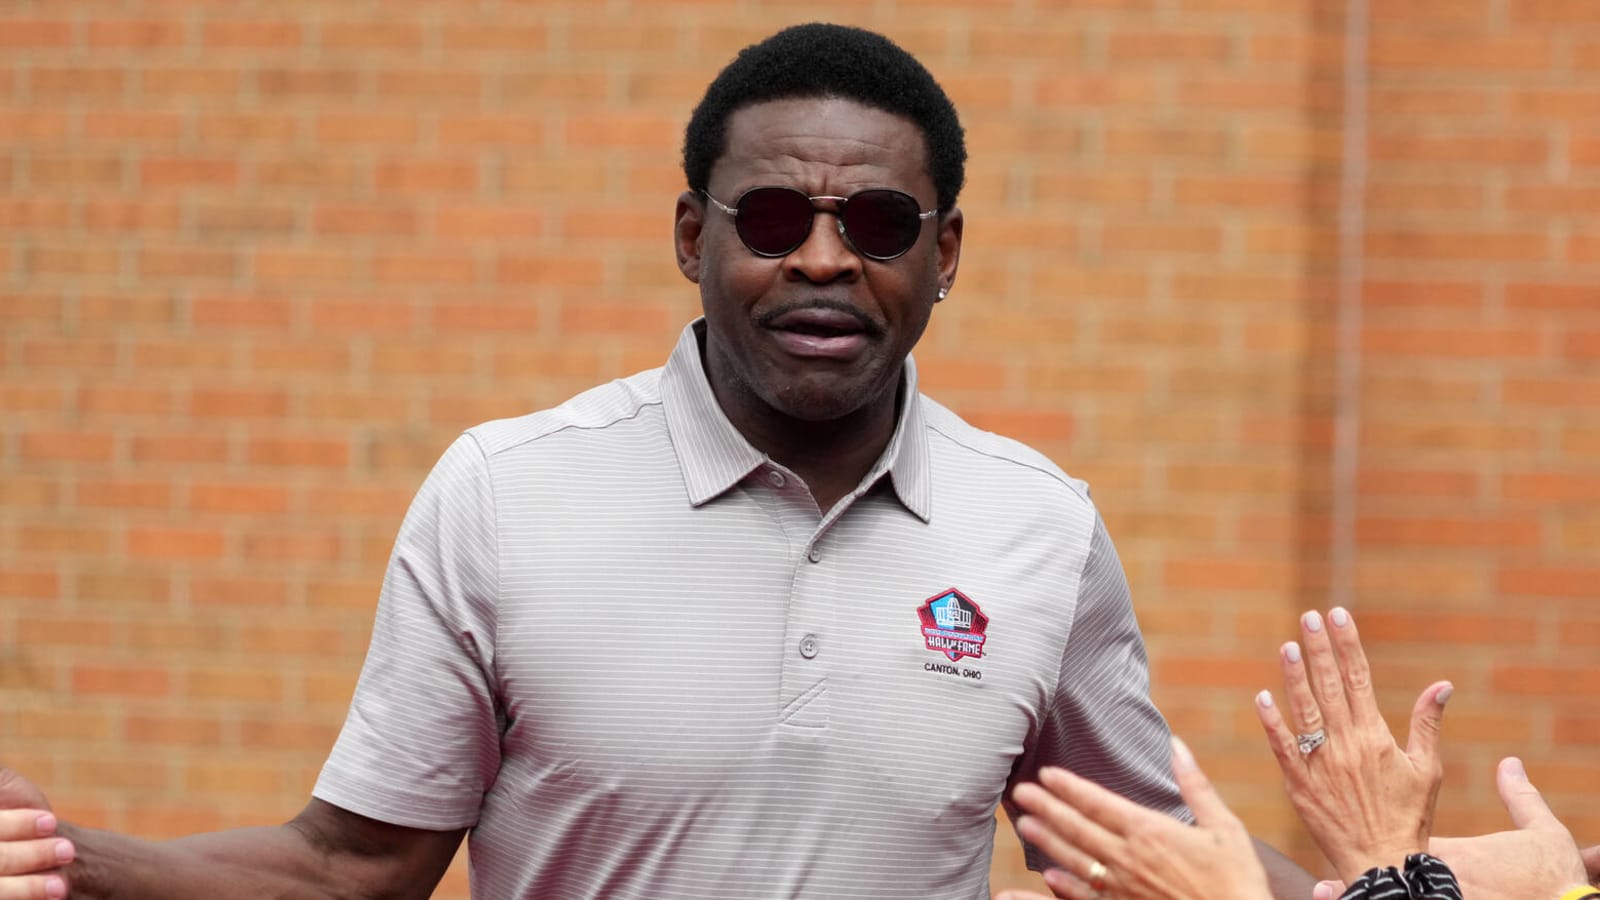 Michael Irvin gets emotional during witness account of hotel incident